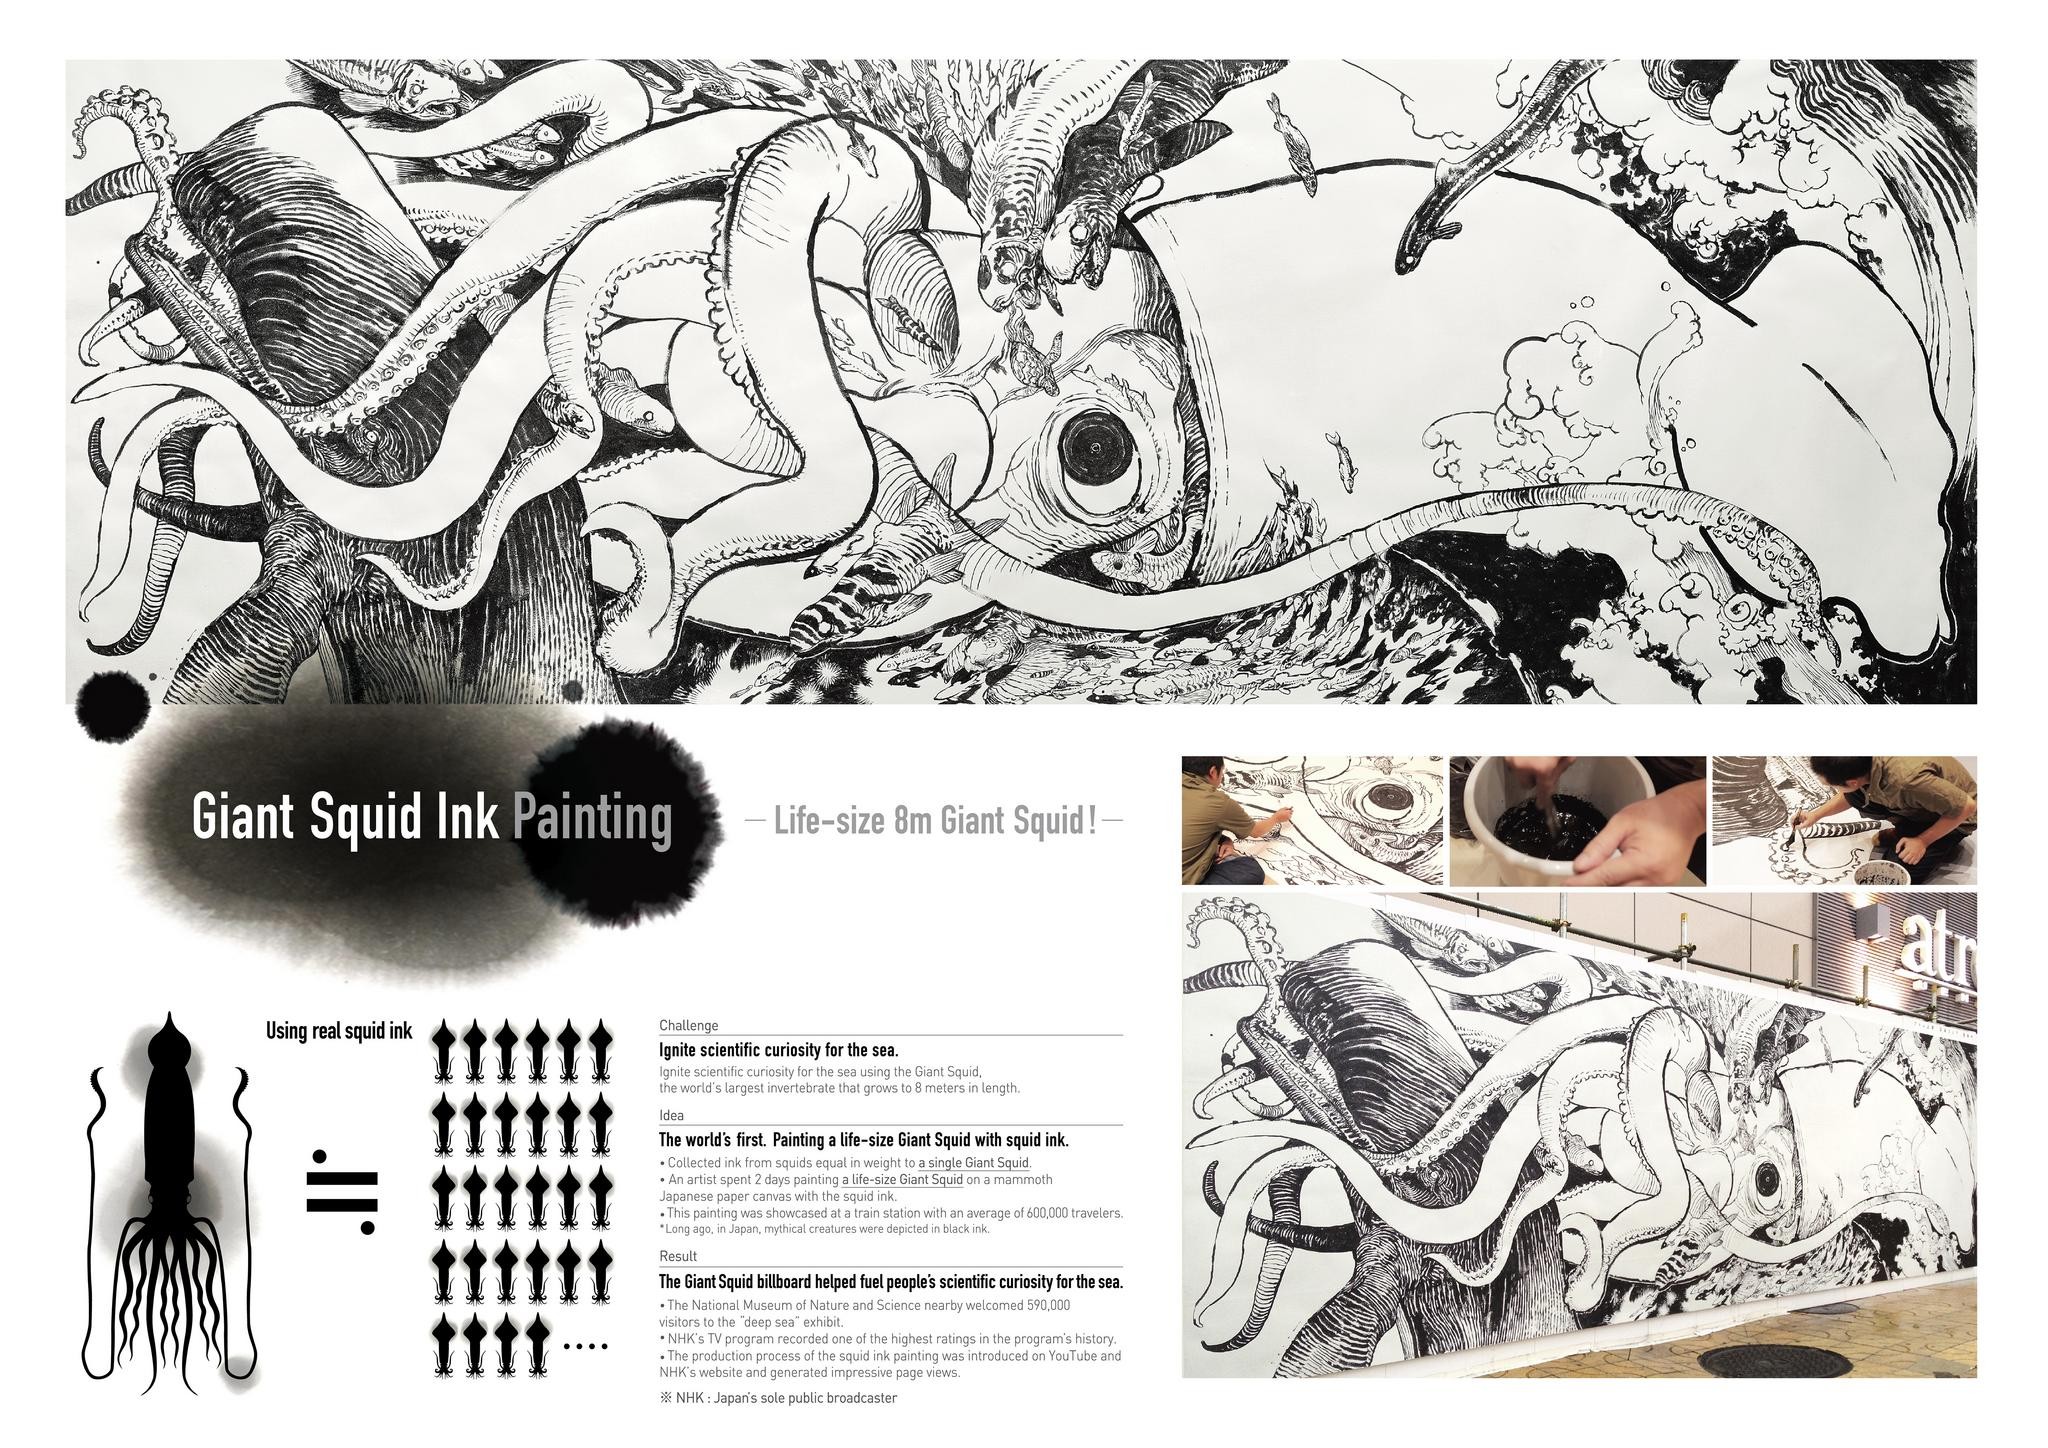 GIANT SQUID INK PAINTING